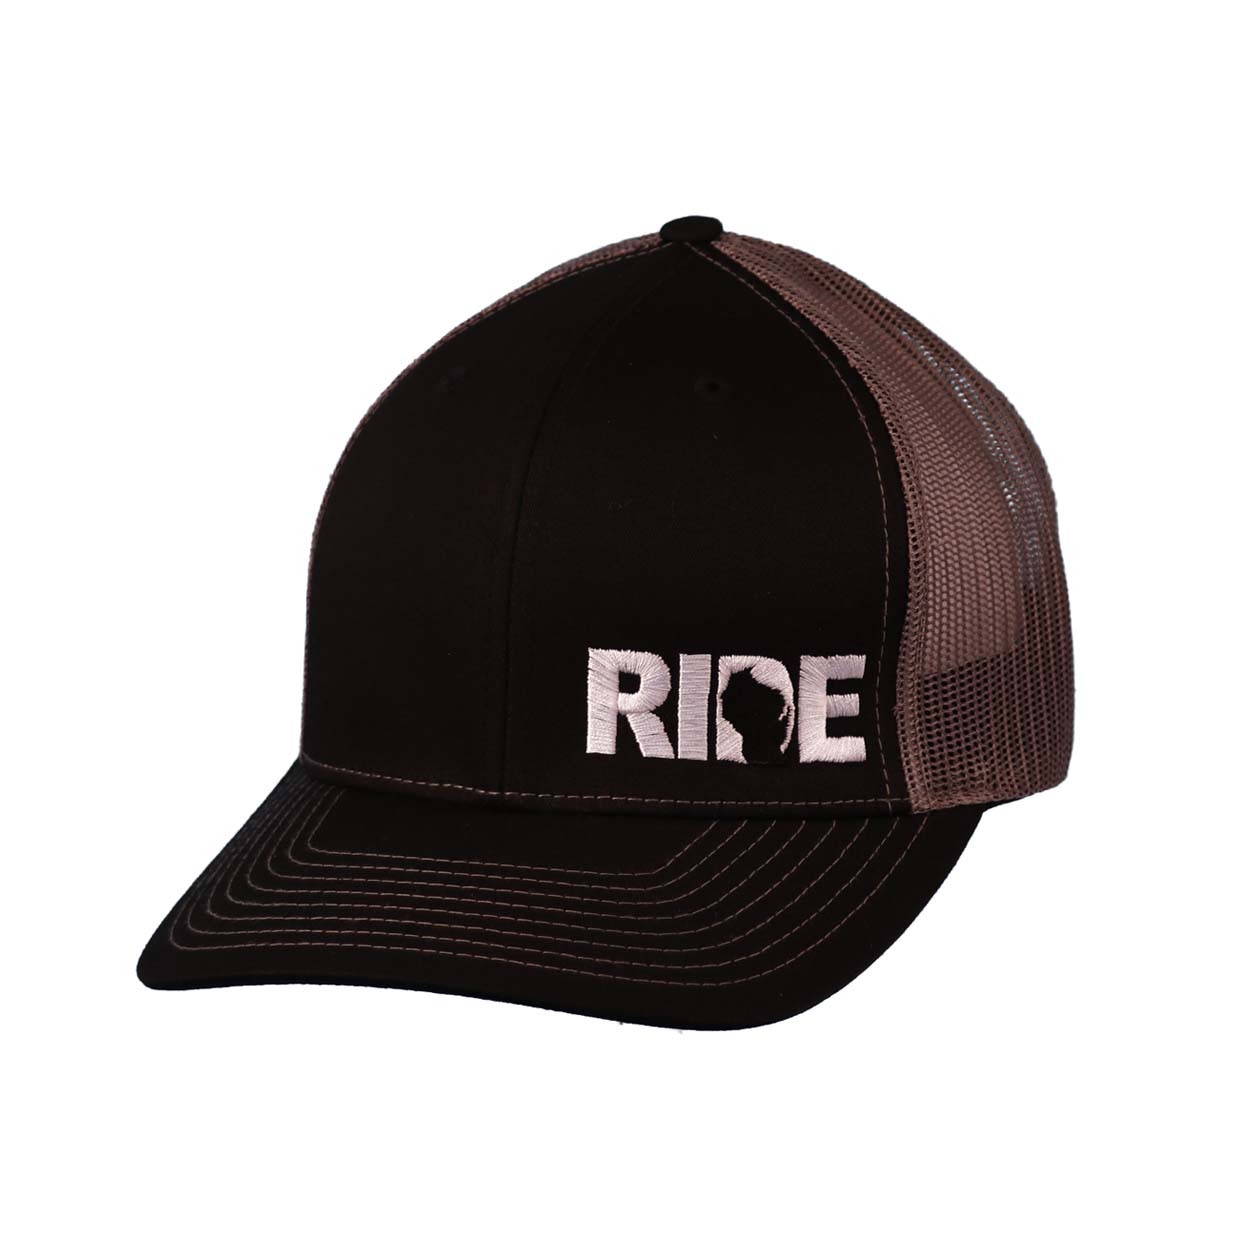 Ride Wisconsin Classic Pro Night Out Embroidered Snapback Trucker Hat Black/Gray